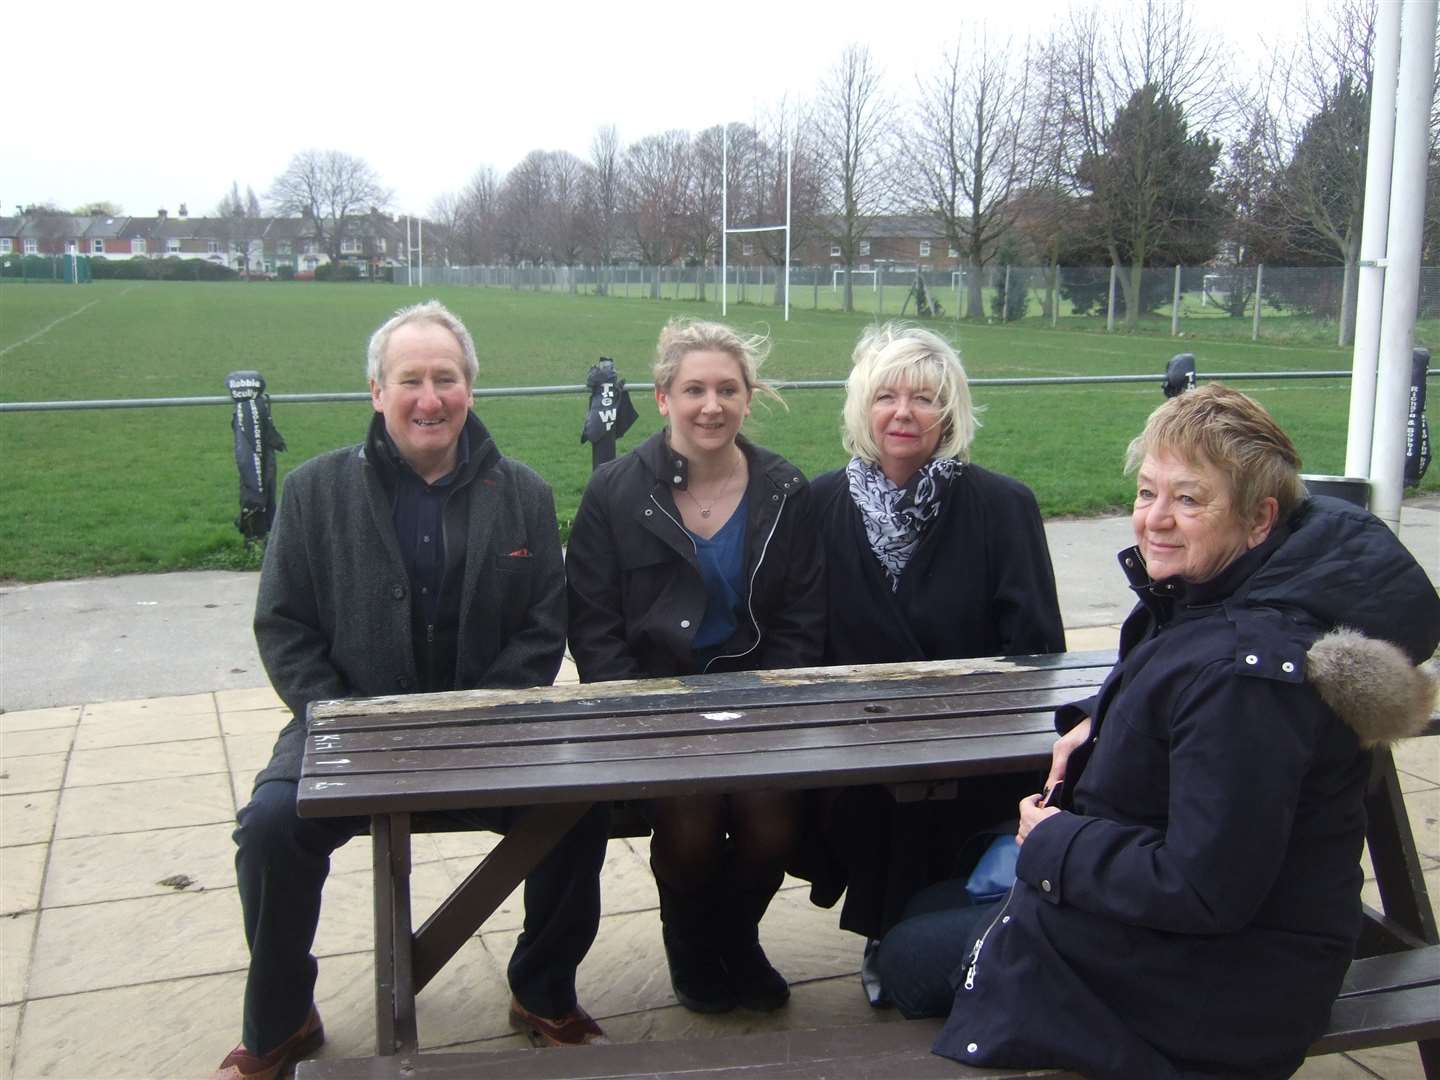 Walmer Sports Spectacular volunteers: chairman David Thompson, Angela Stone, Susan McCarthy and Frances Campbell. Eddie Taylor (not present) makes up the team